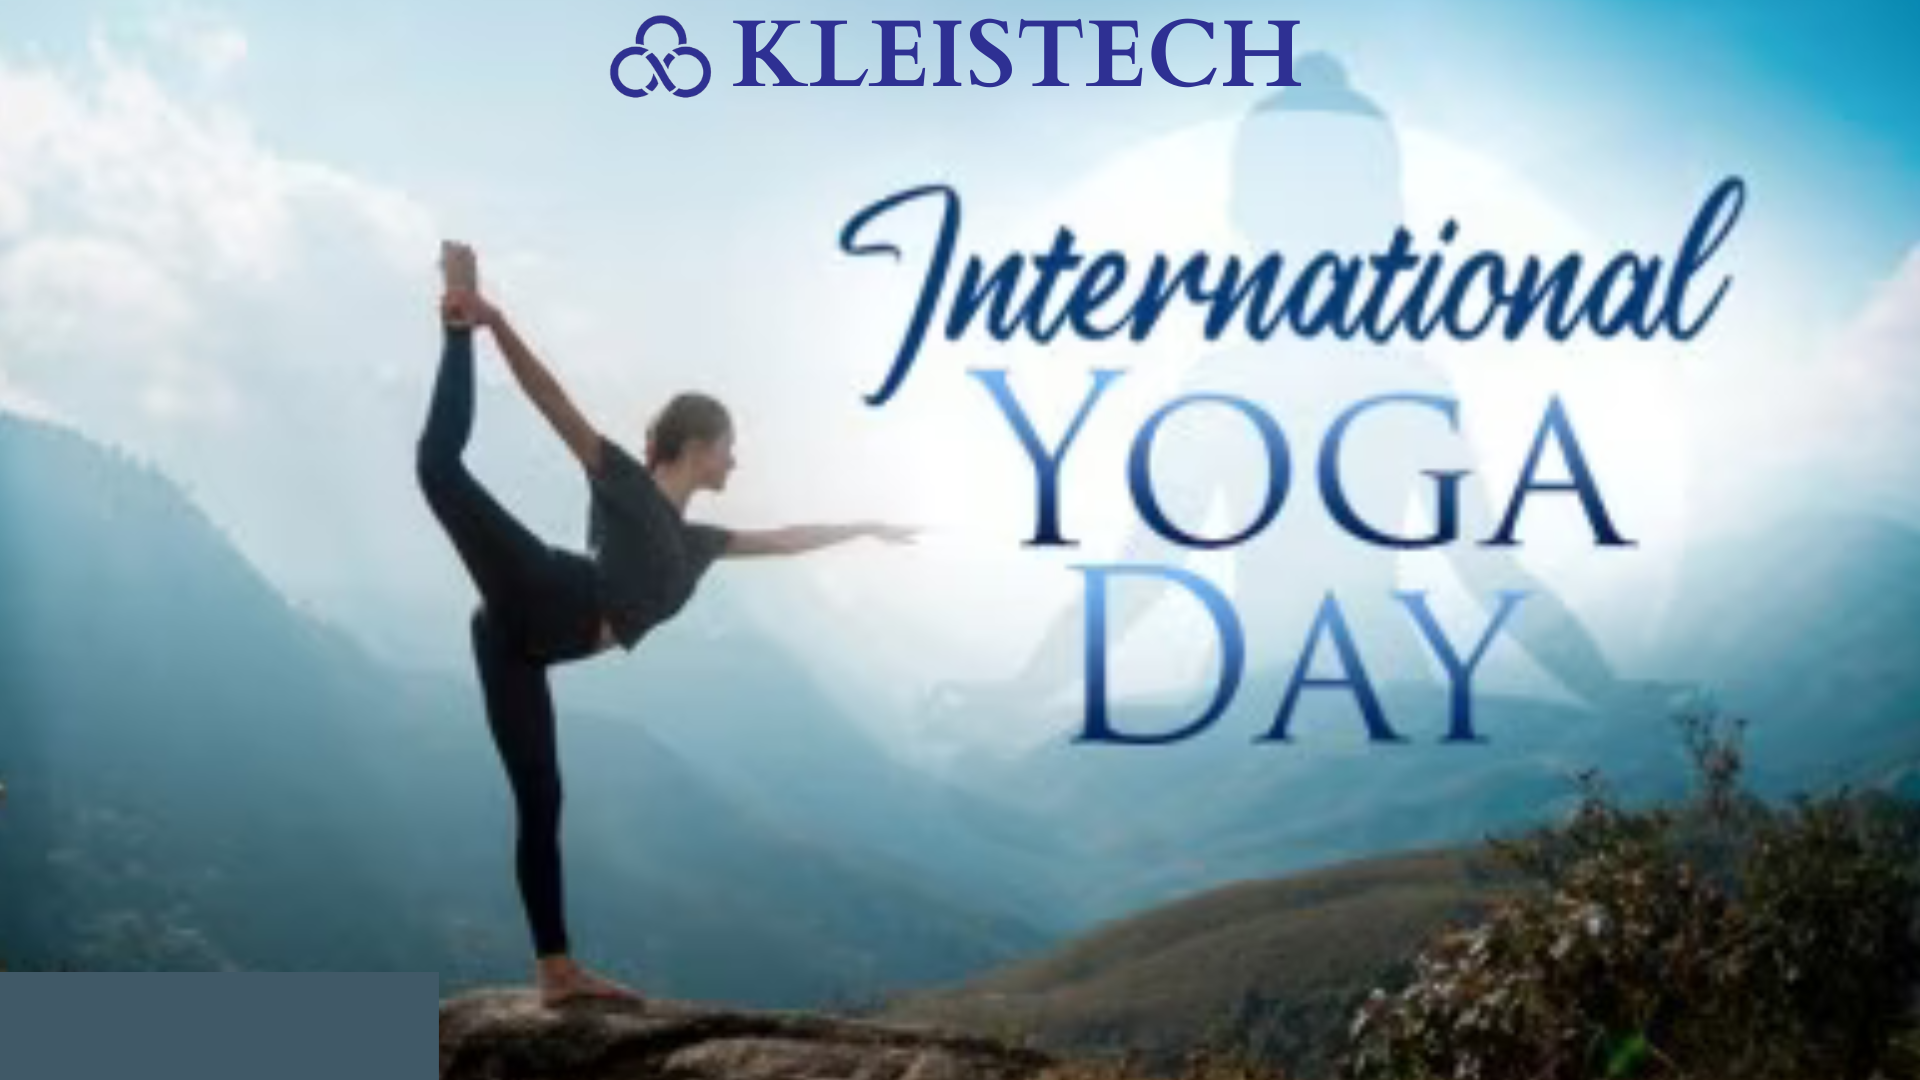 Celebrating International Yoga Day: Inspiring Wishes for a Healthier Workplace